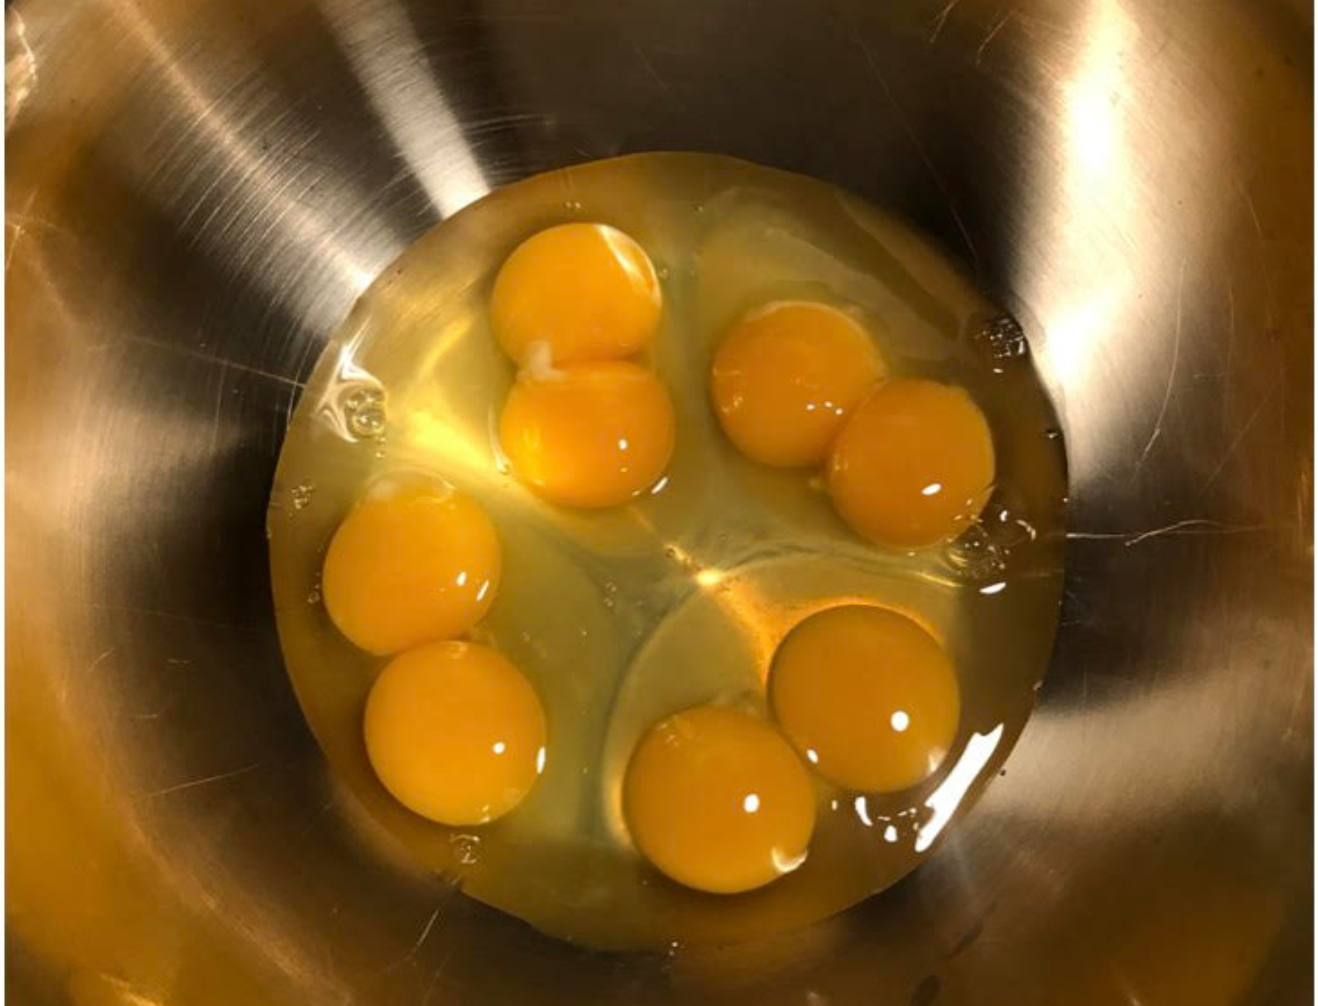 Is it safe to eat a double yolk?